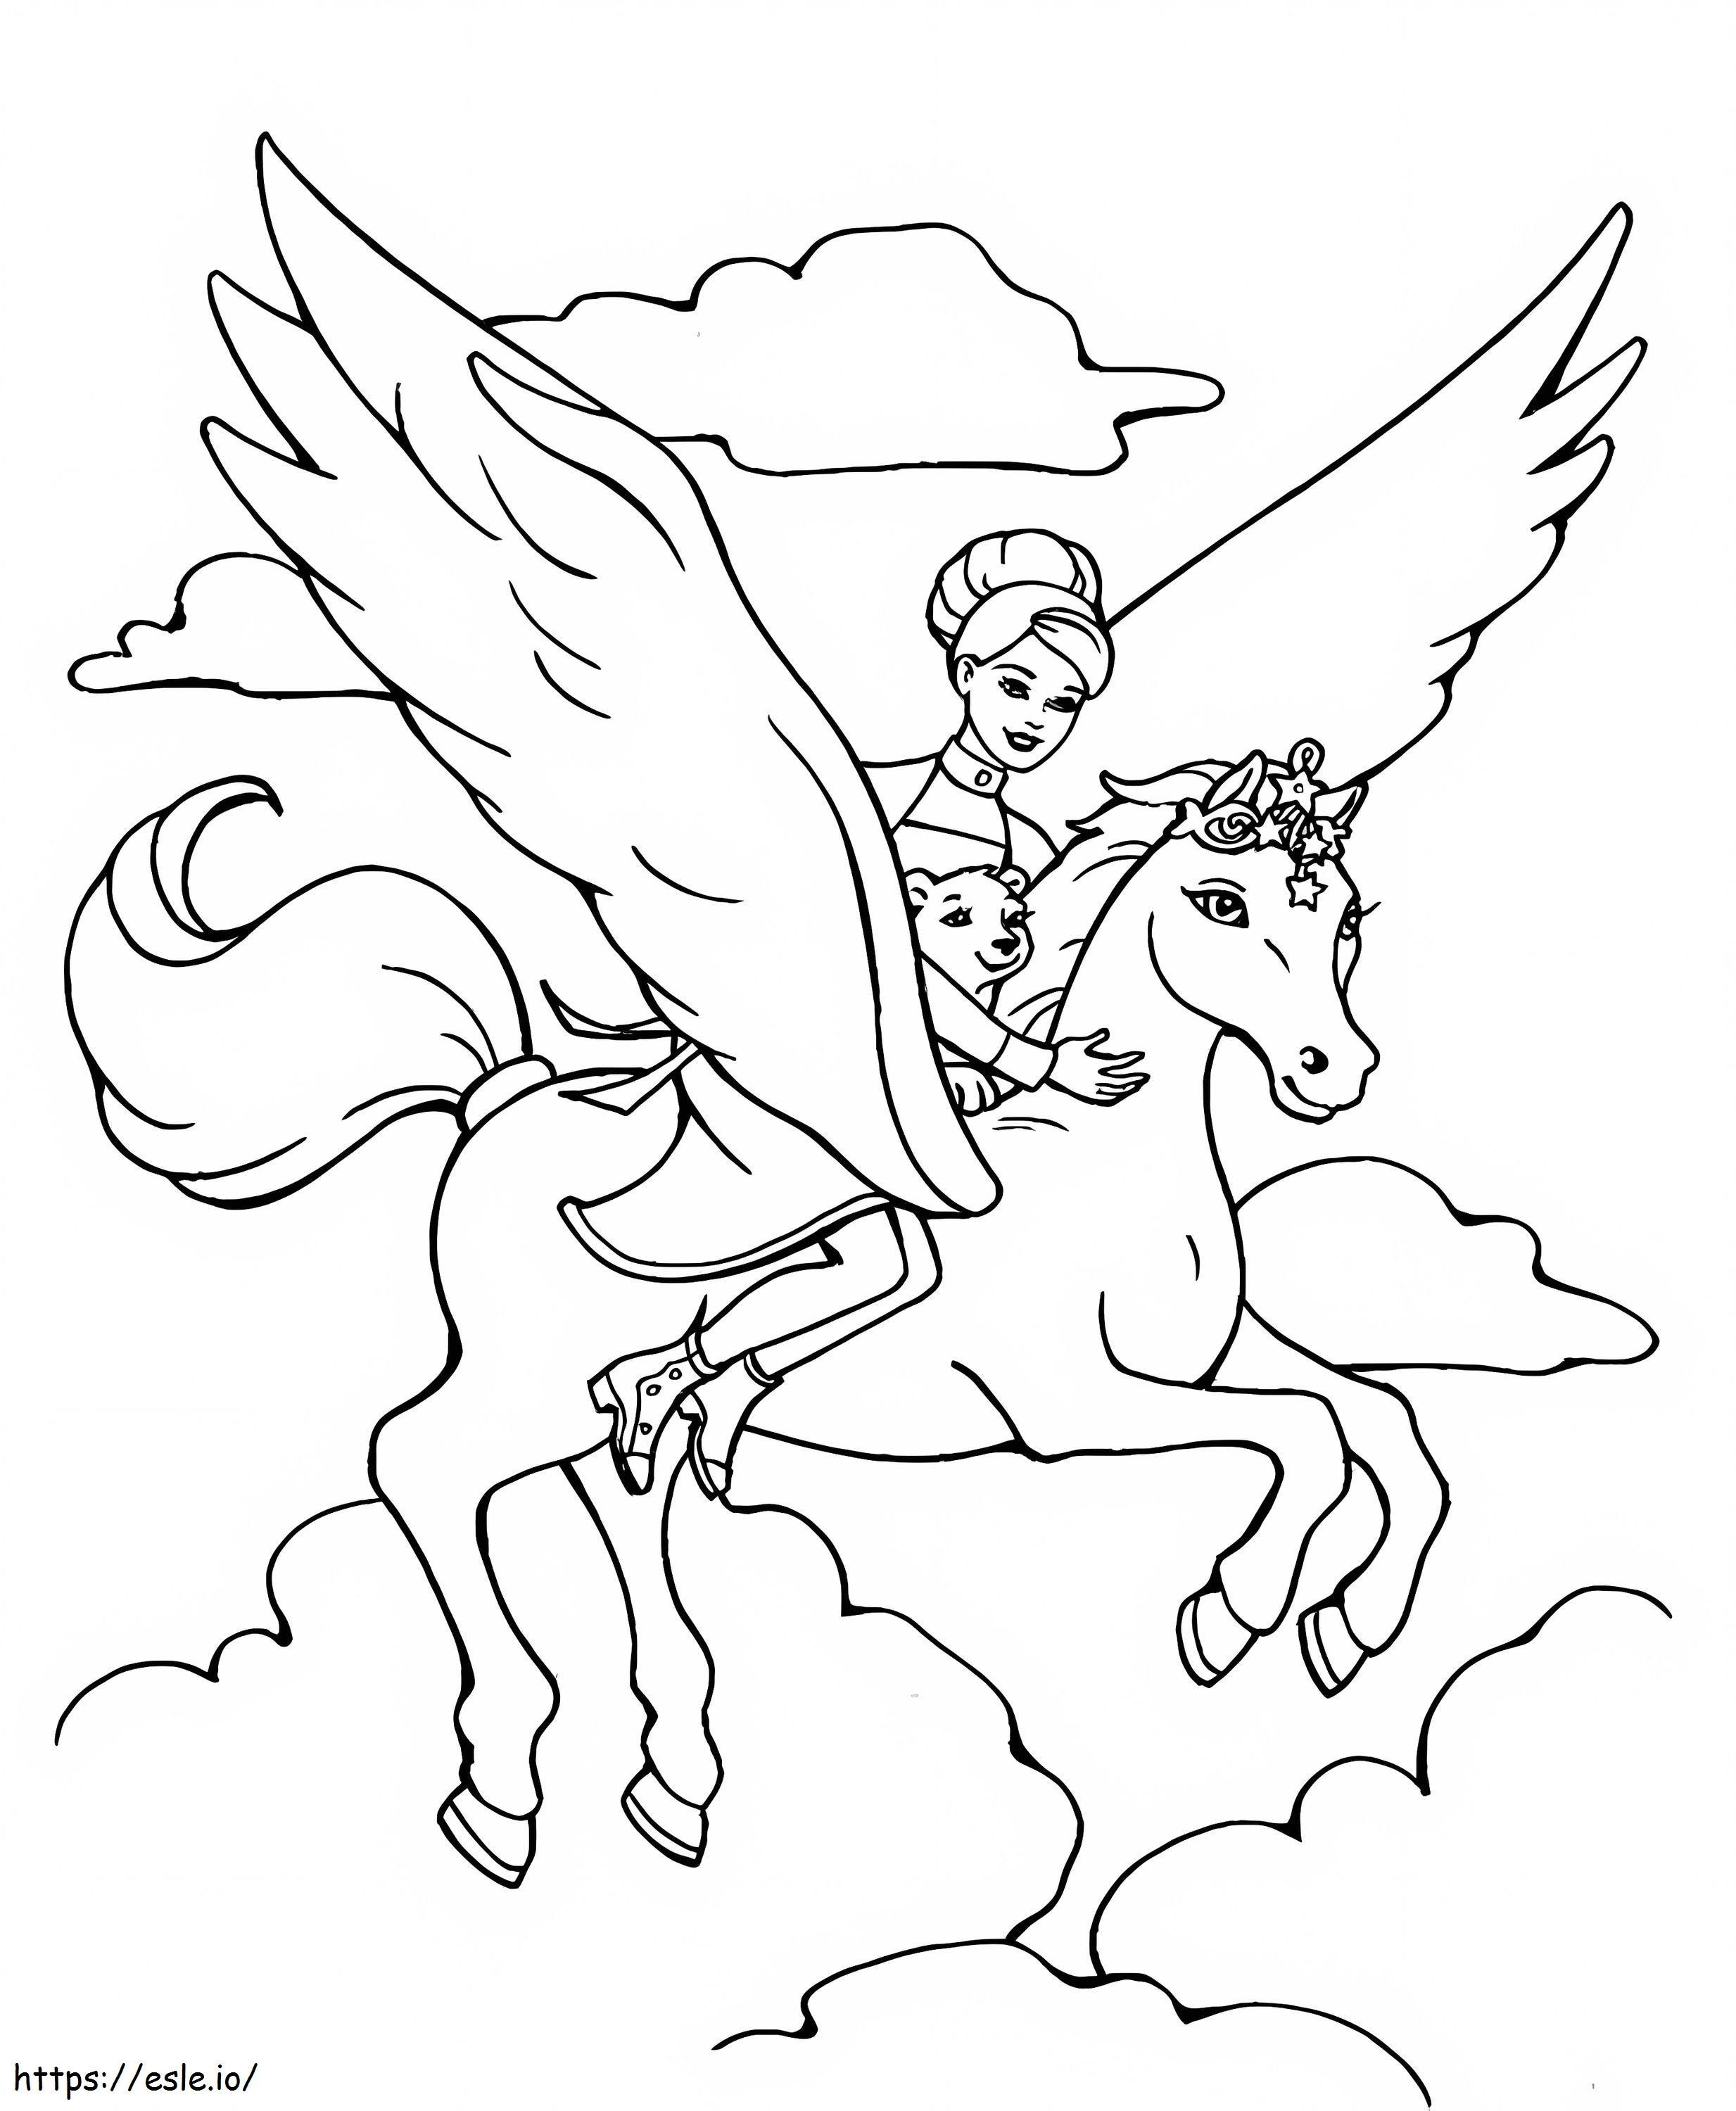 Princess And Dog Riding A Flying Horse coloring page